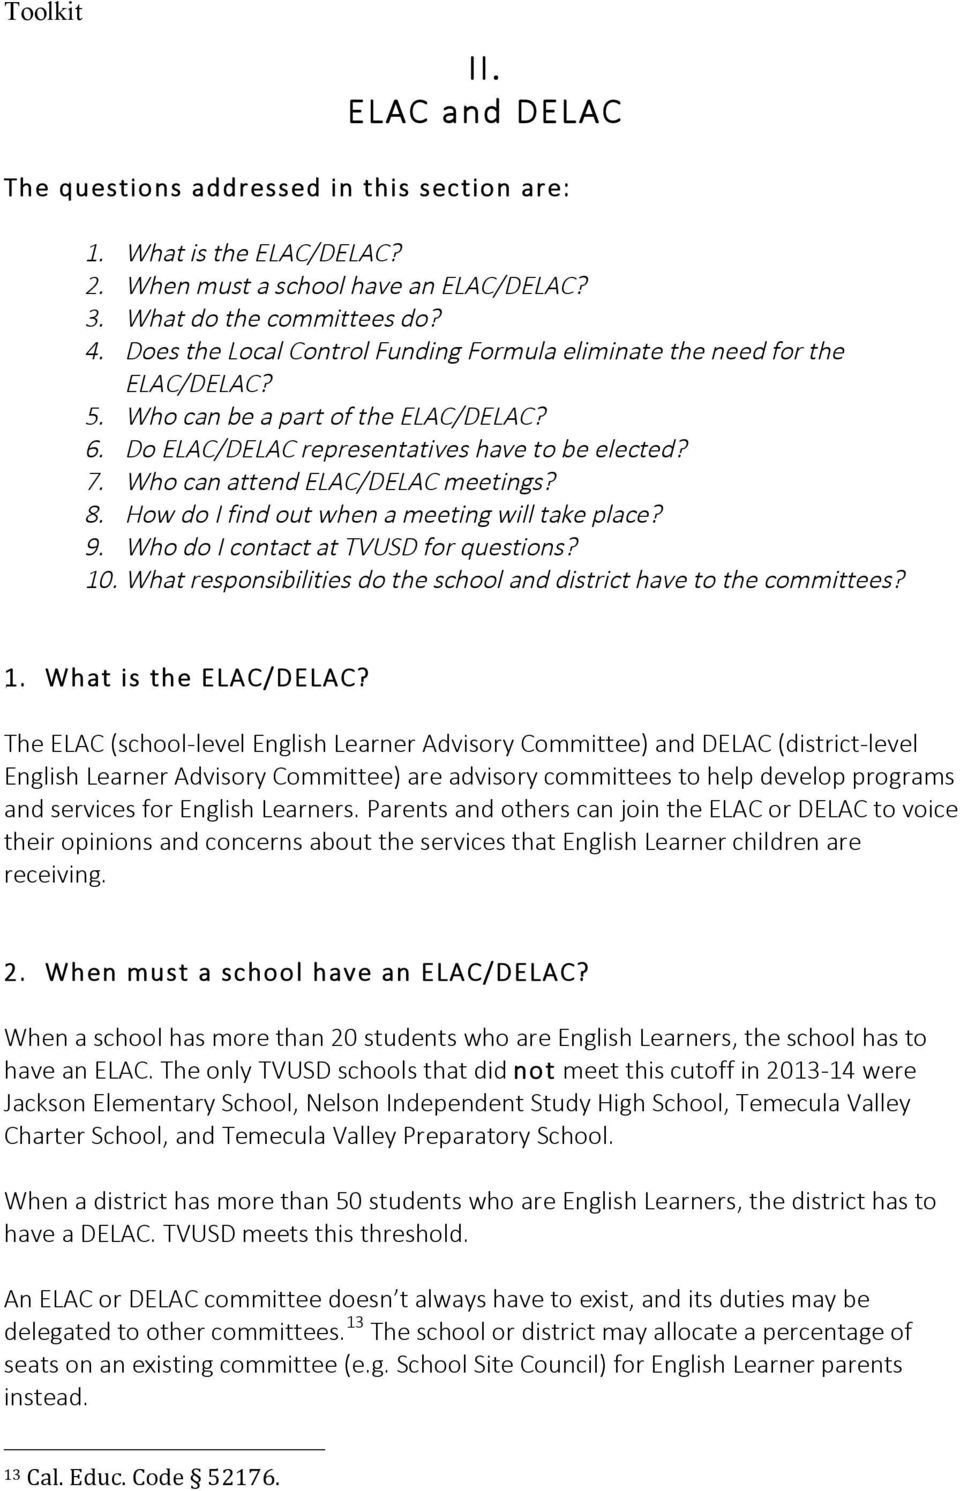 Who can attend ELAC/DELAC meetings? 8. How do I find out when a meeting will take place? 9. Who do I contact at TVUSD for questions? 10.